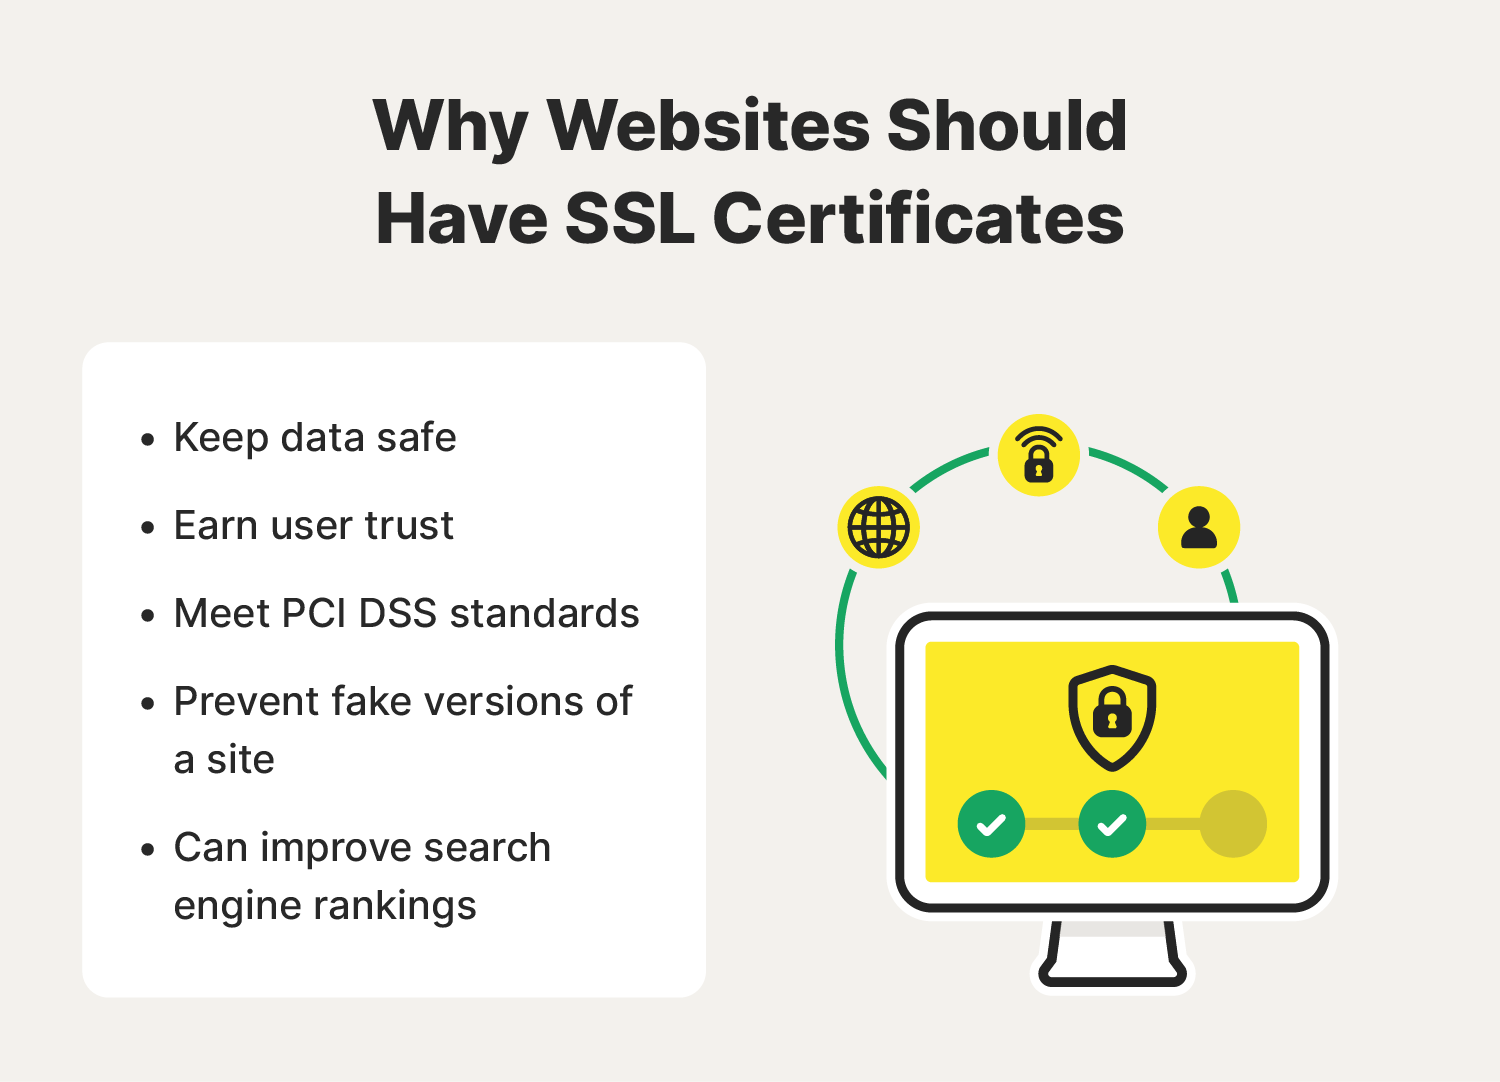 Illustrated chart explaining a few of the main reasons why websites should have SSL certificates.